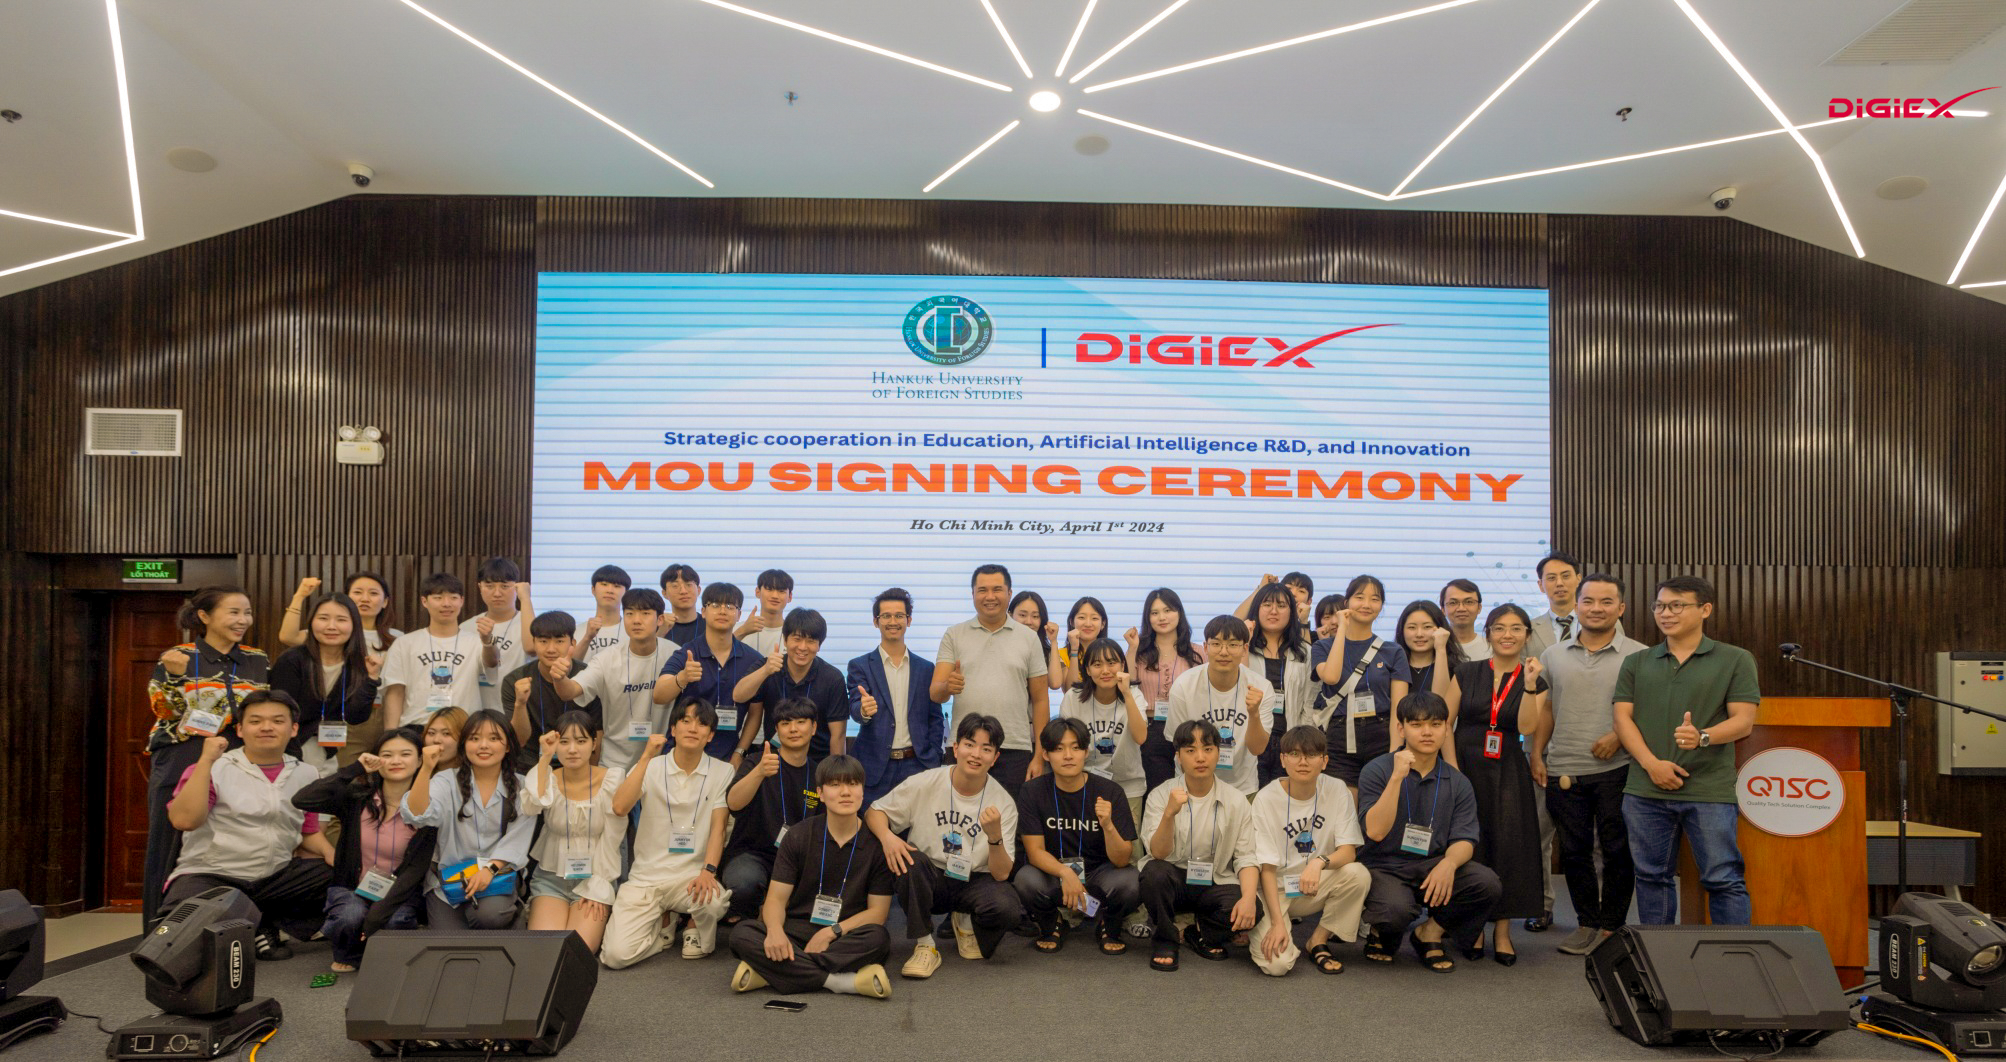 DigiEx Group and HUFS signed a MOU on strategic partnership